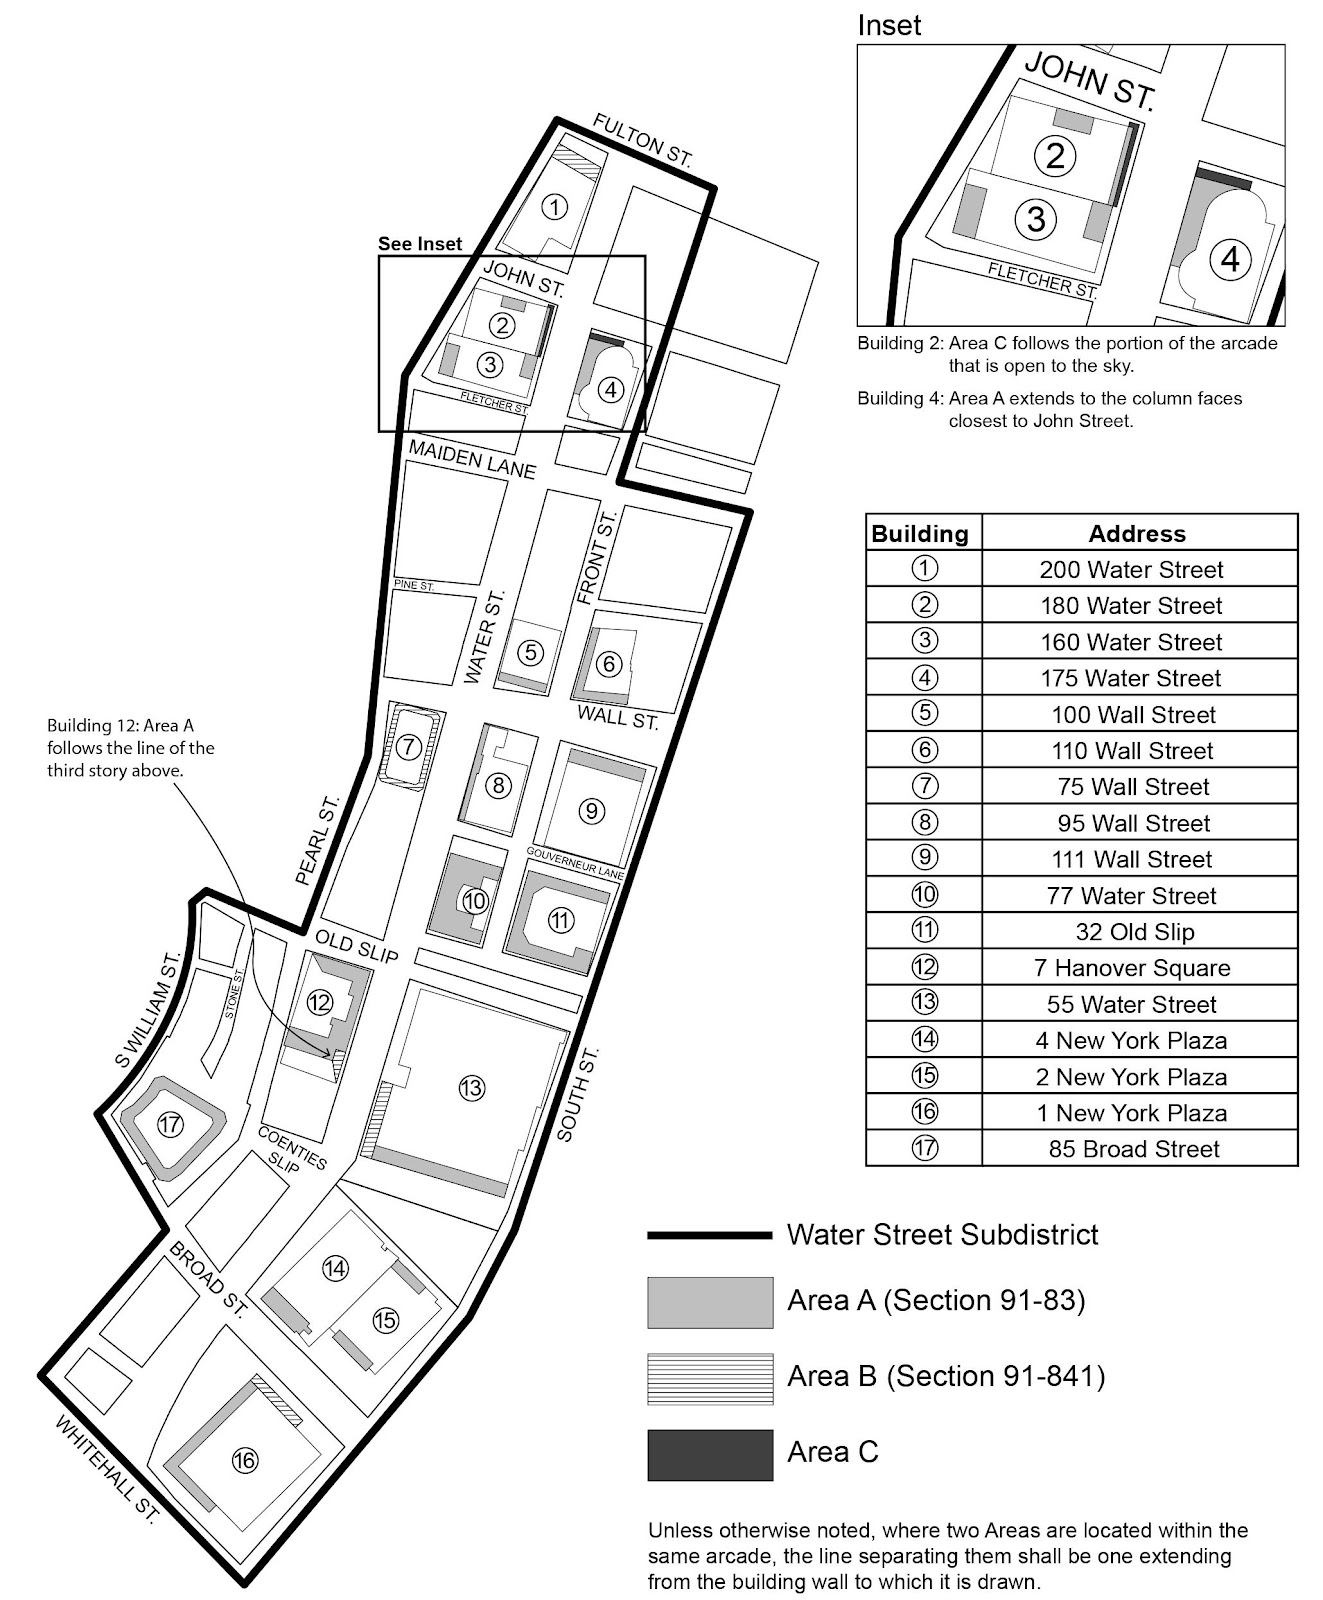 Zoning Resolutions Chapter 1: Special Lower Manhattan District Appendix A.8